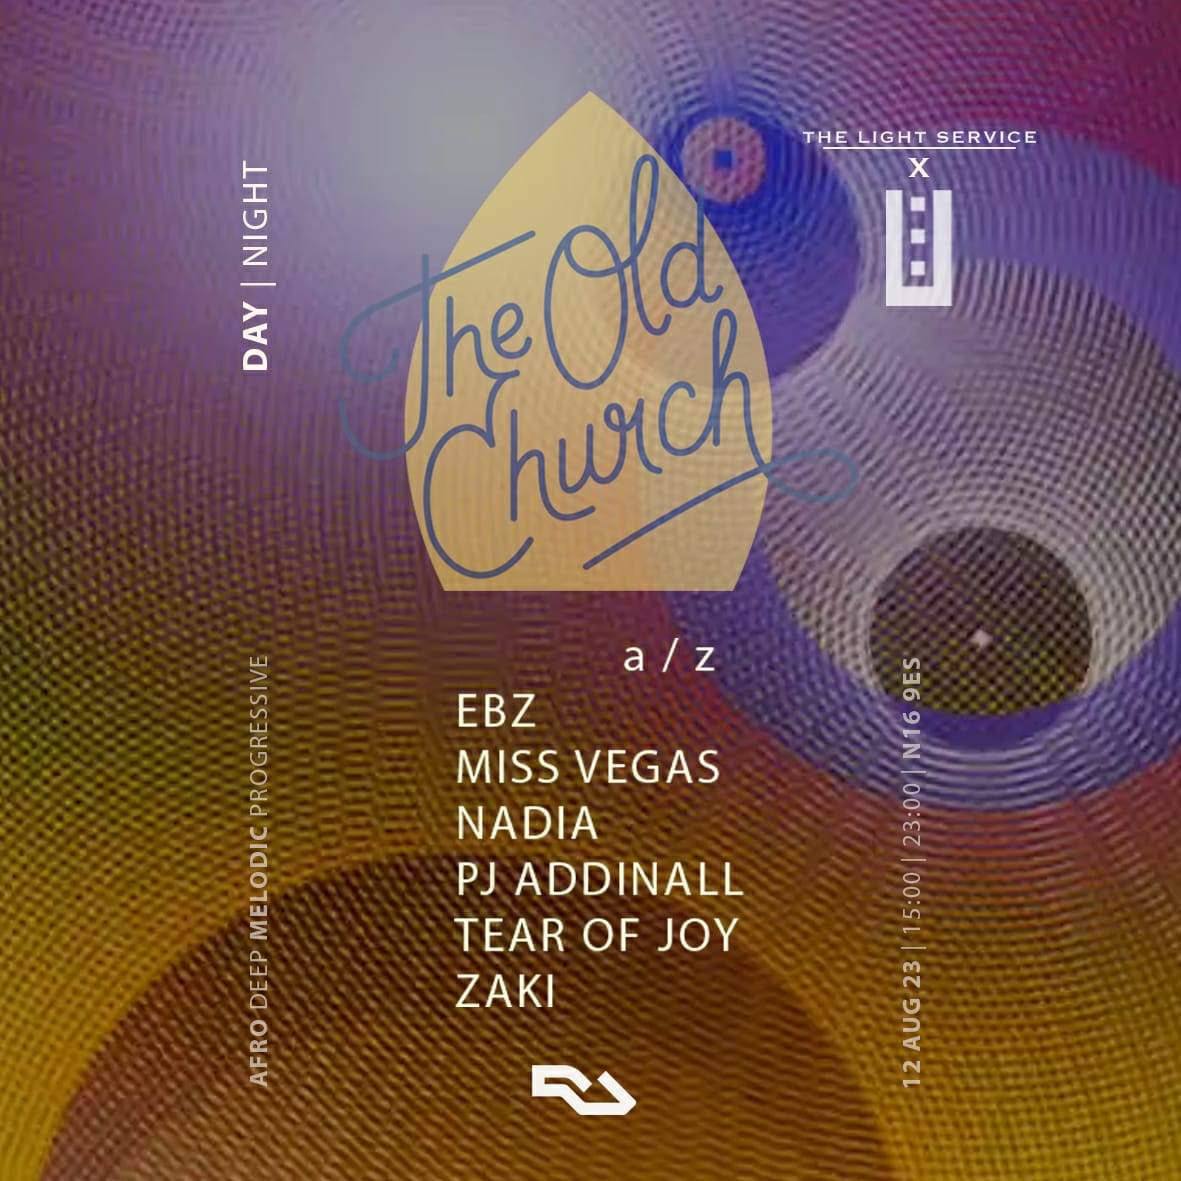 Light Service x Usual Day to Night - Página frontal